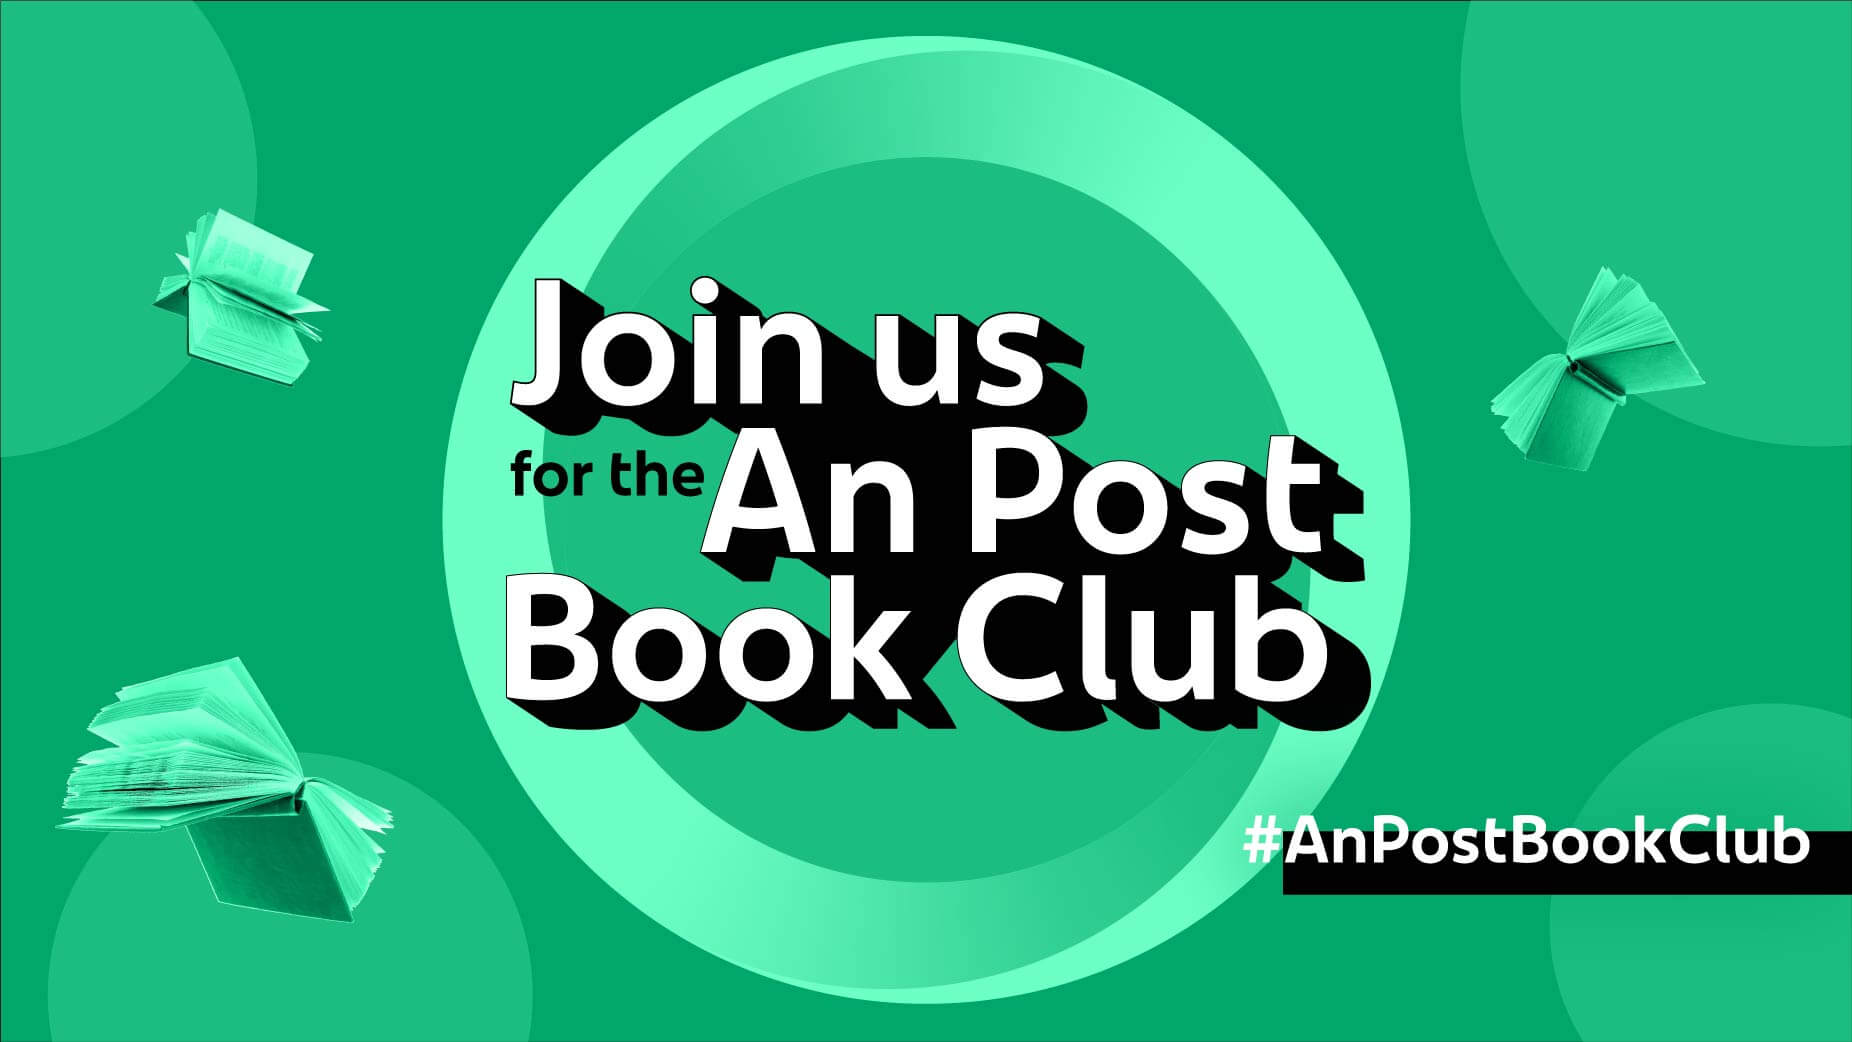 Join us for the An Post Book Club